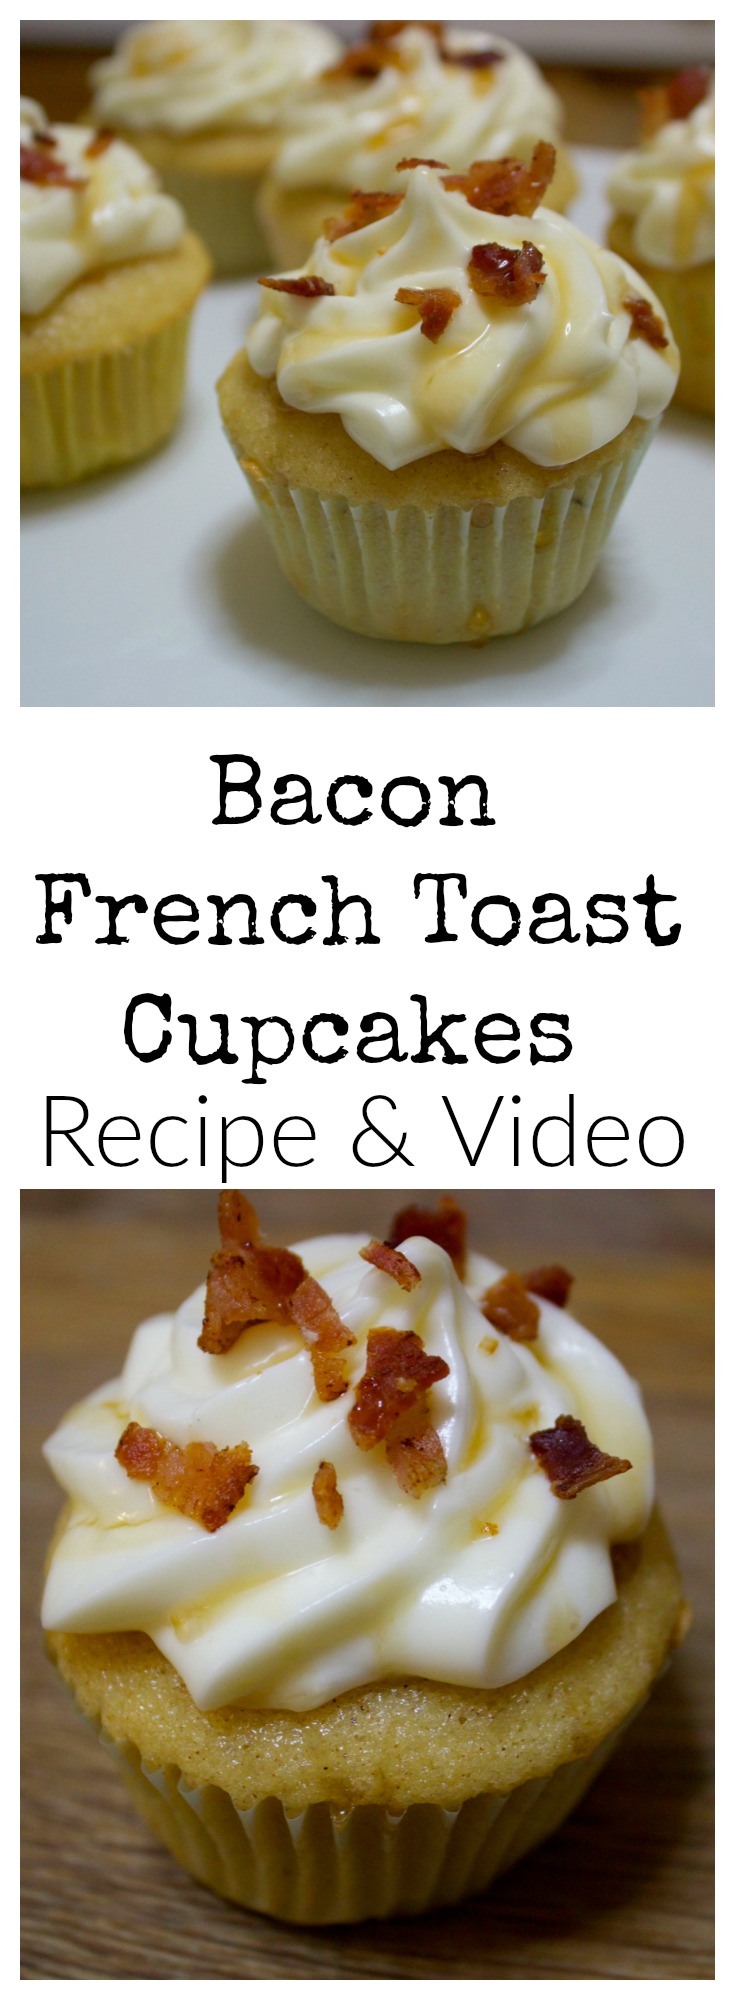 Bacon Fresh Toast Cupcakes | Recipe and Video from Cooked By Julie